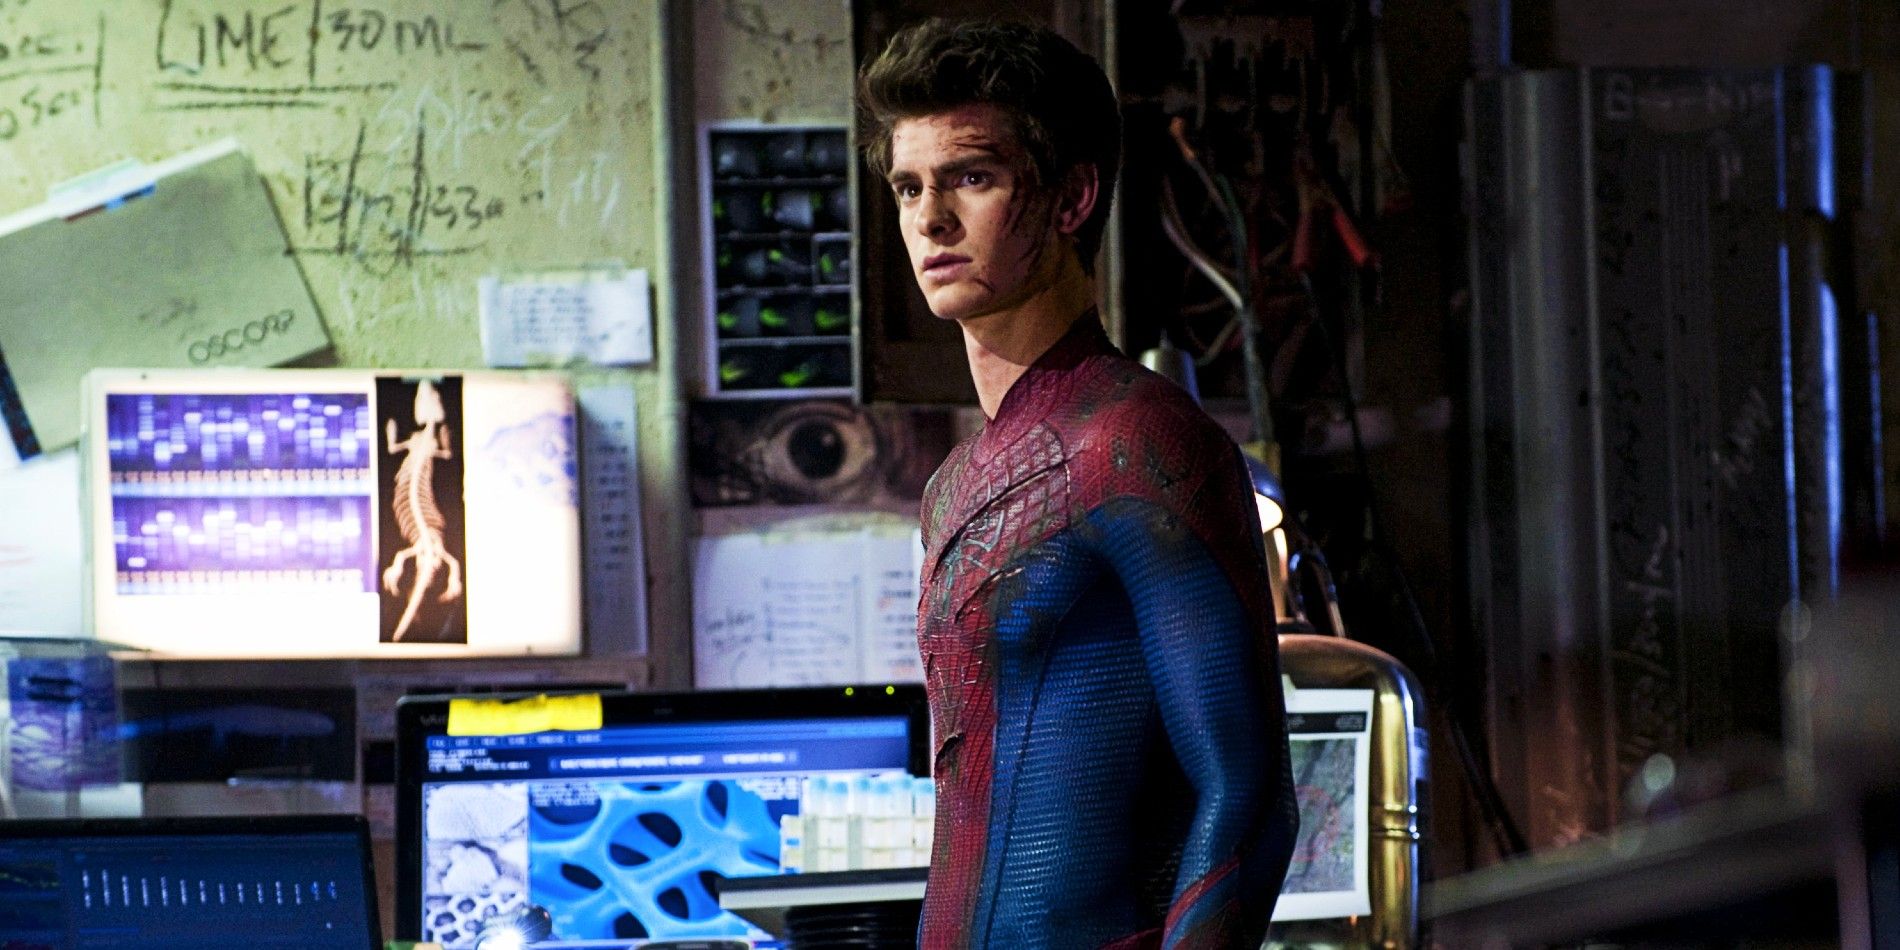 Andrew Garfield Reflects on Amazing Spider-Man 'Fights' With No Way Home  Producer Amy Pascal